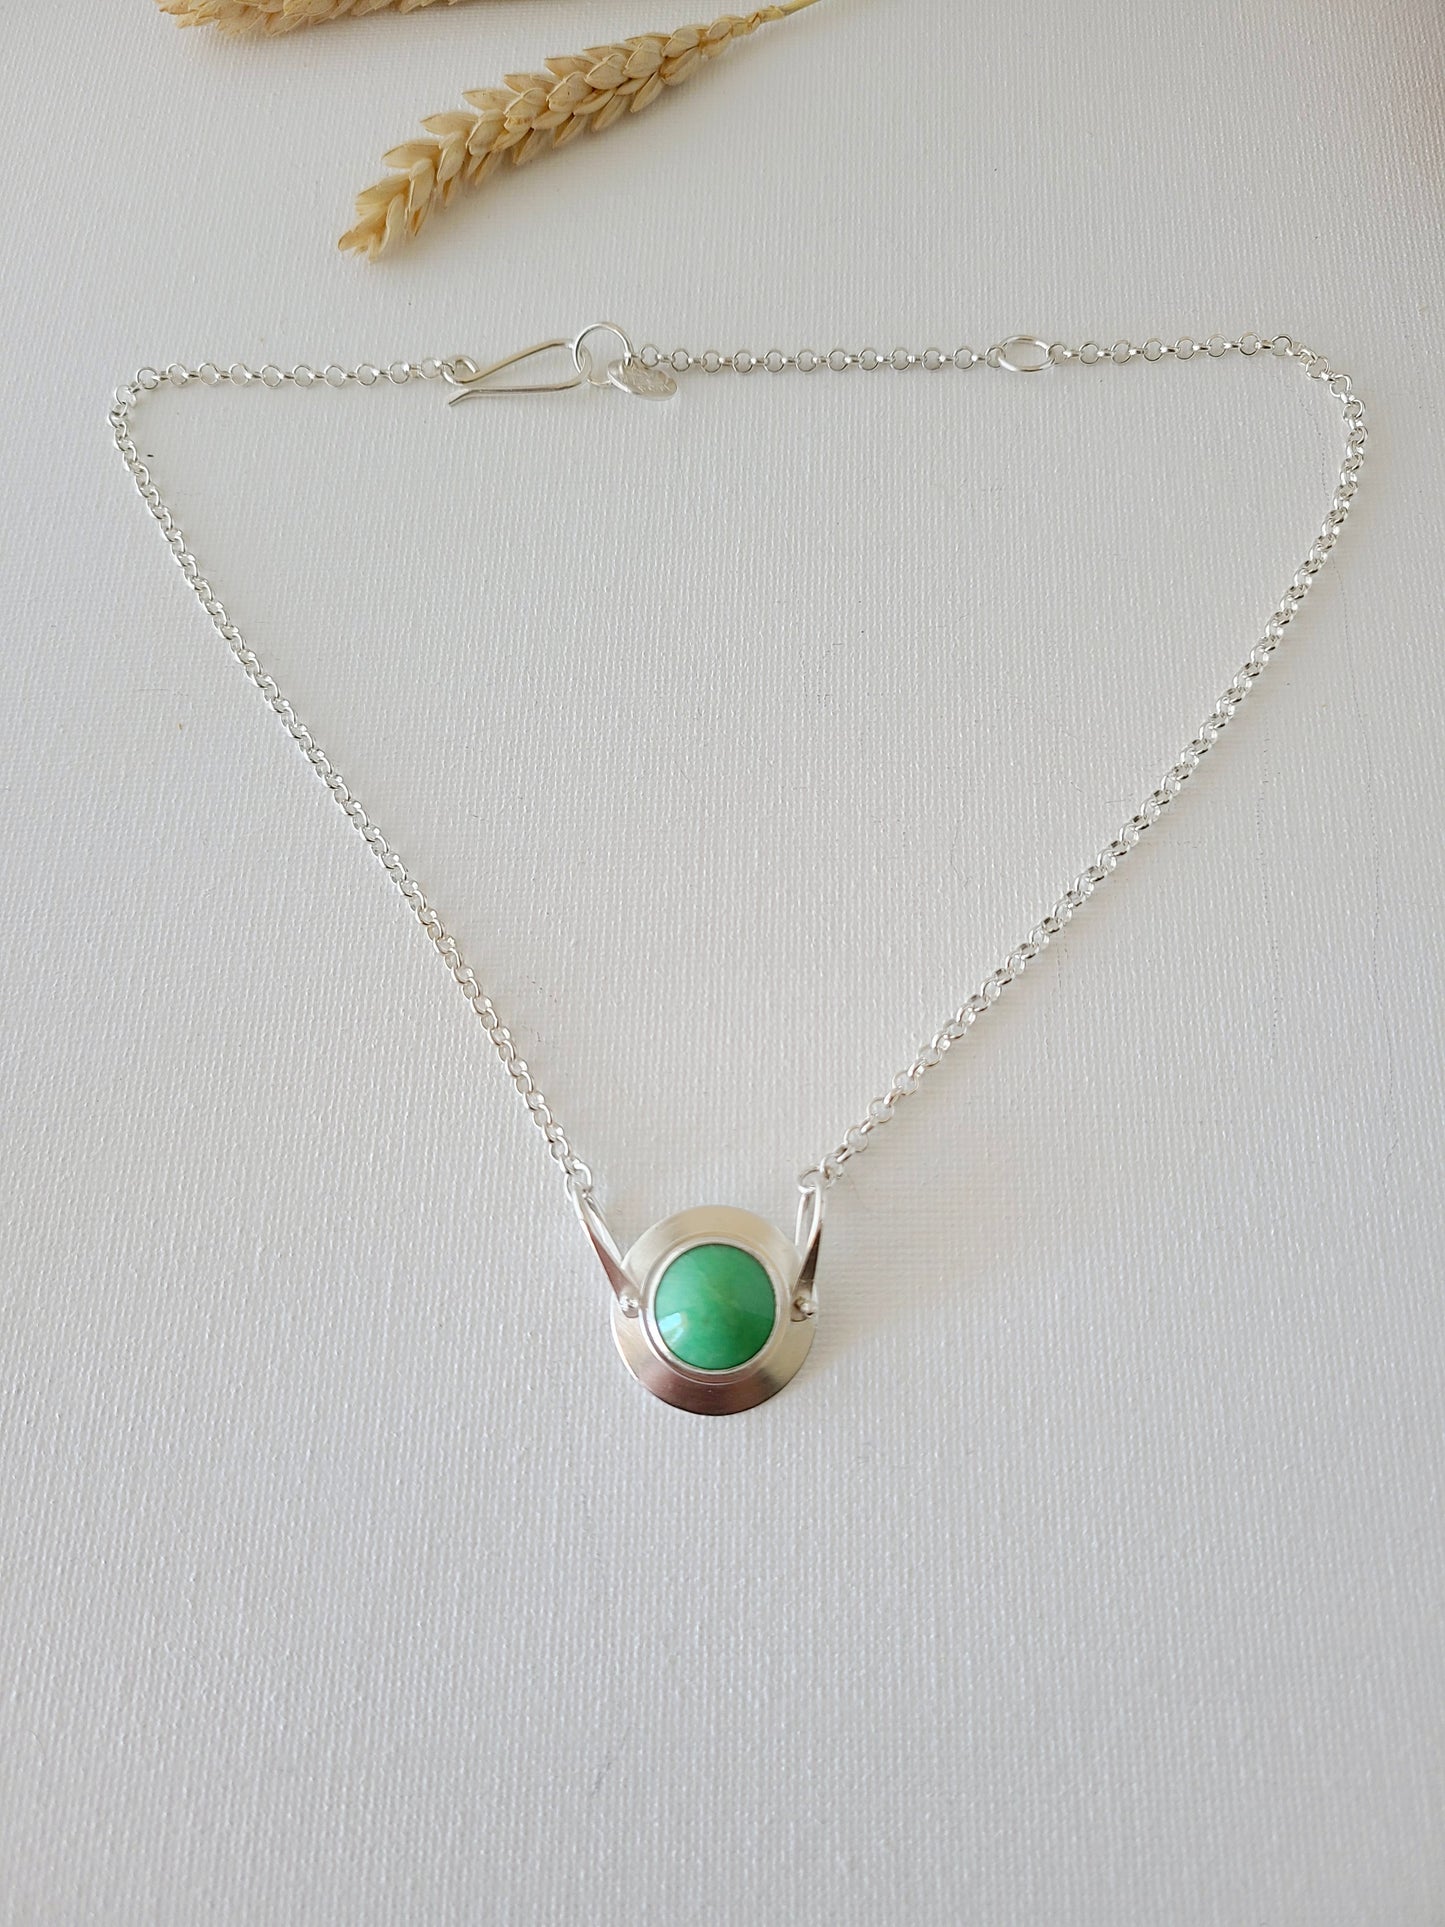 Tarn Necklace with Variscite